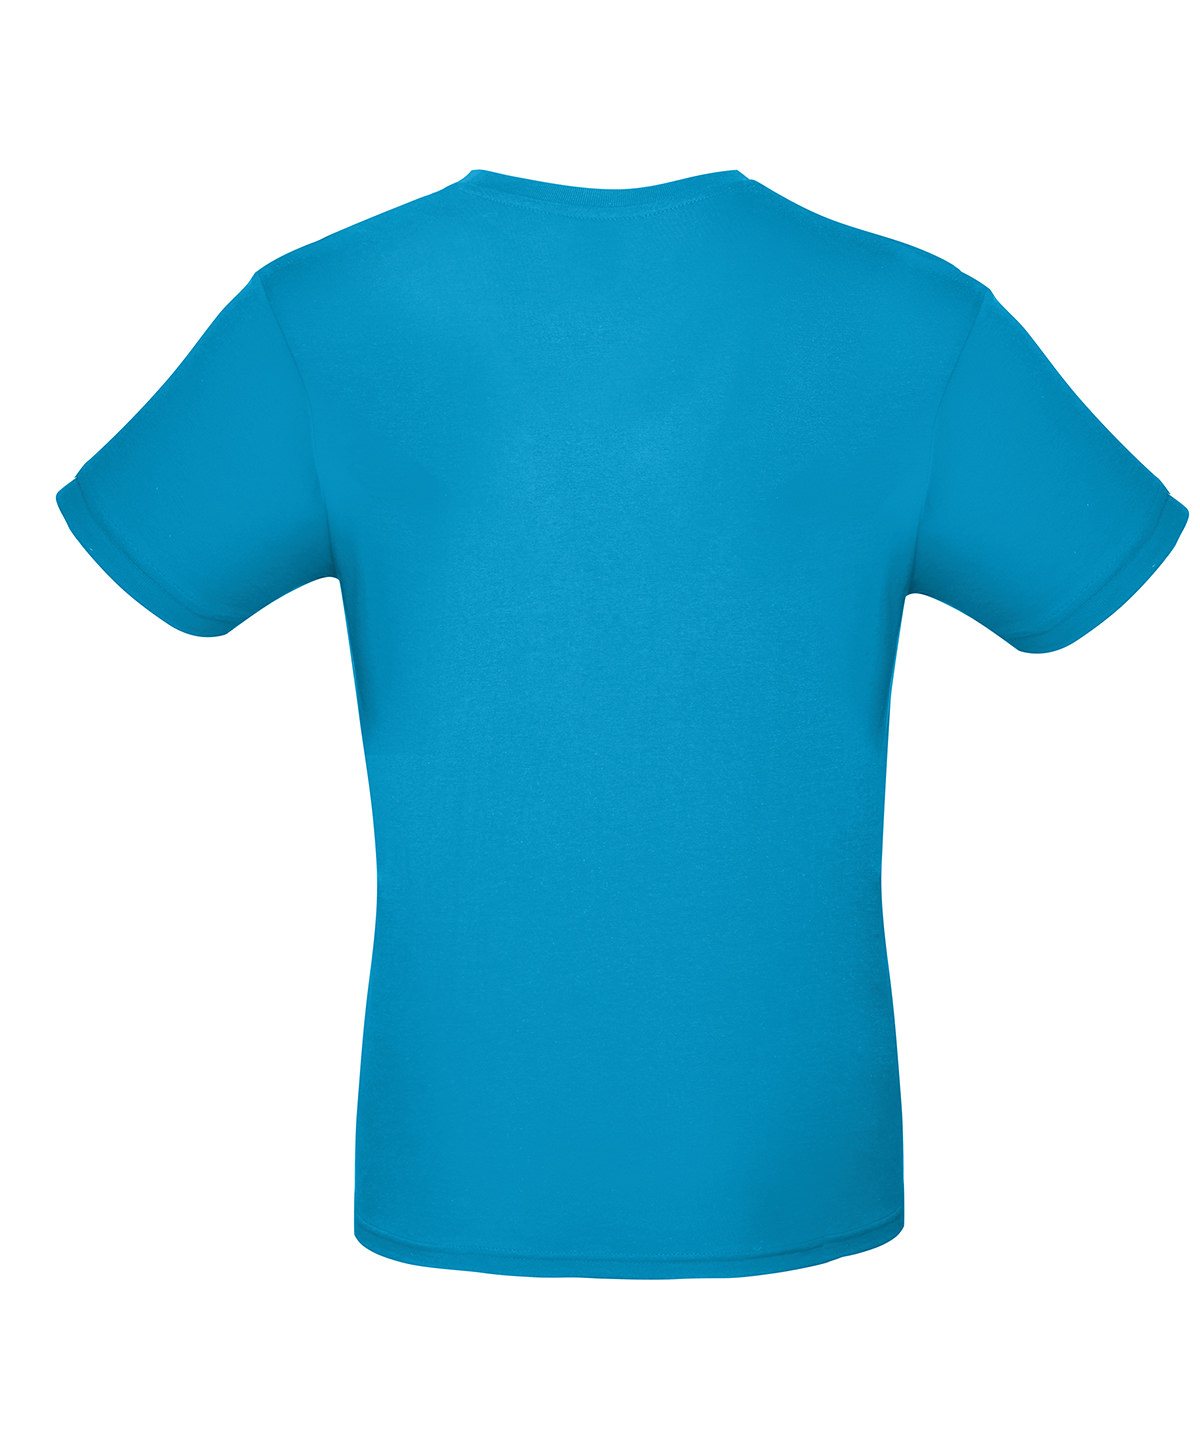 t-shirt in blue back